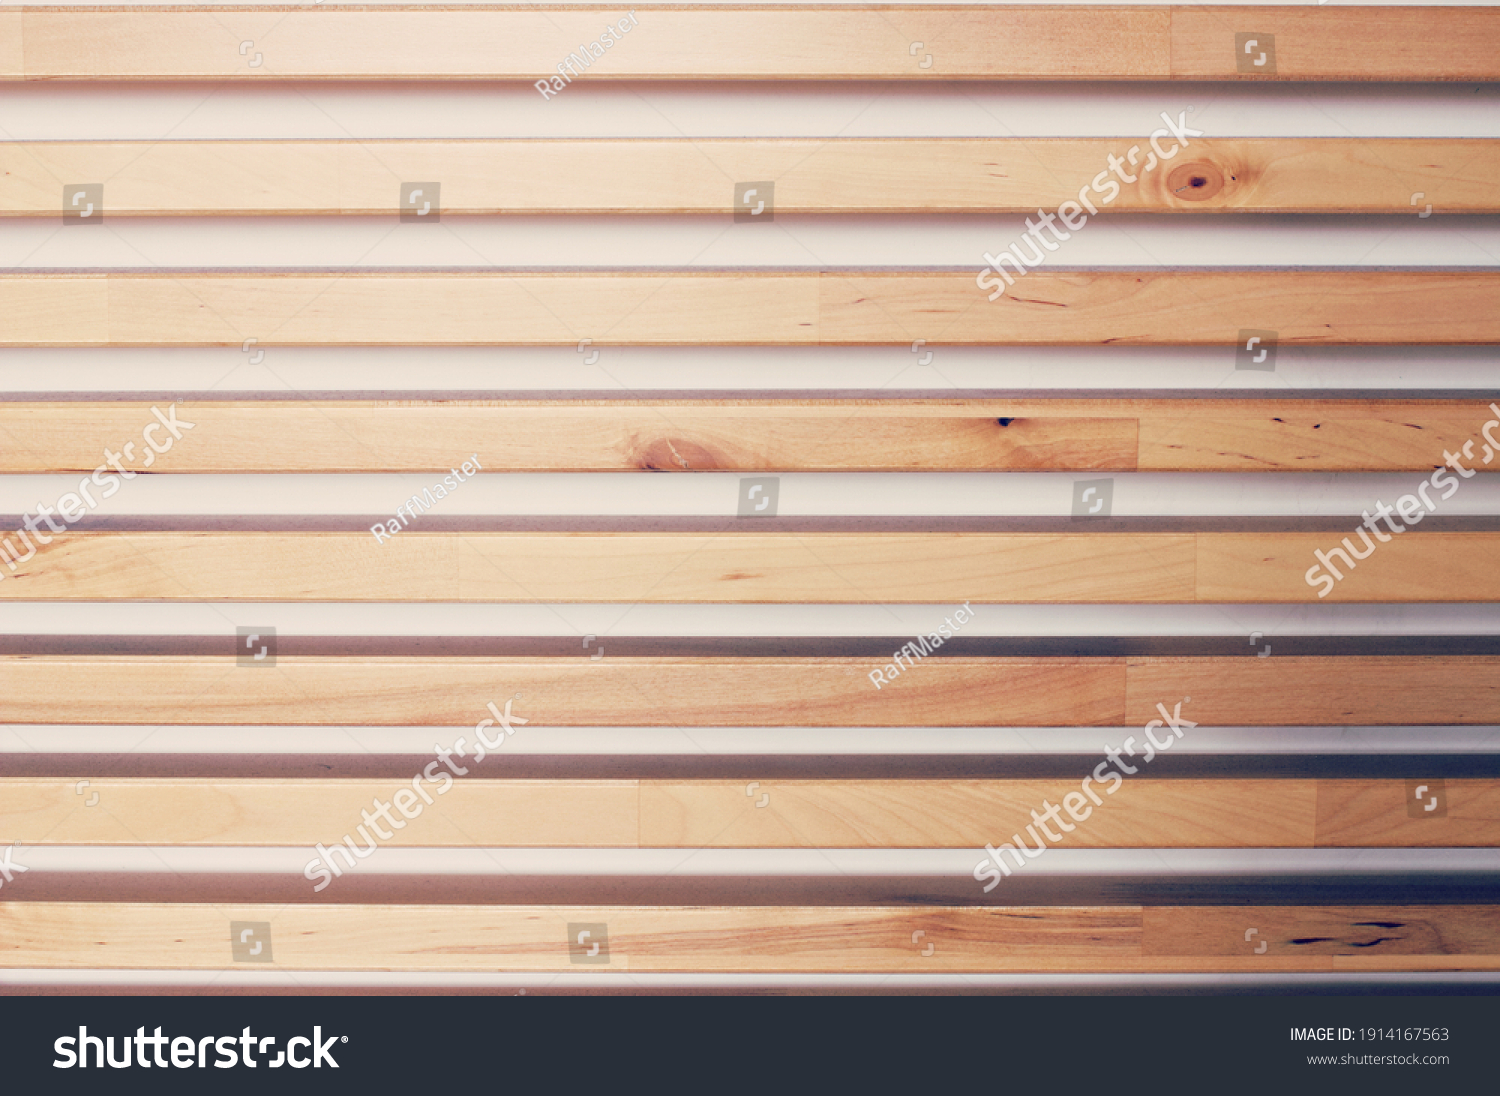 Wooden Planks Texture Shabby Chic Background Stock Photo 1914167563